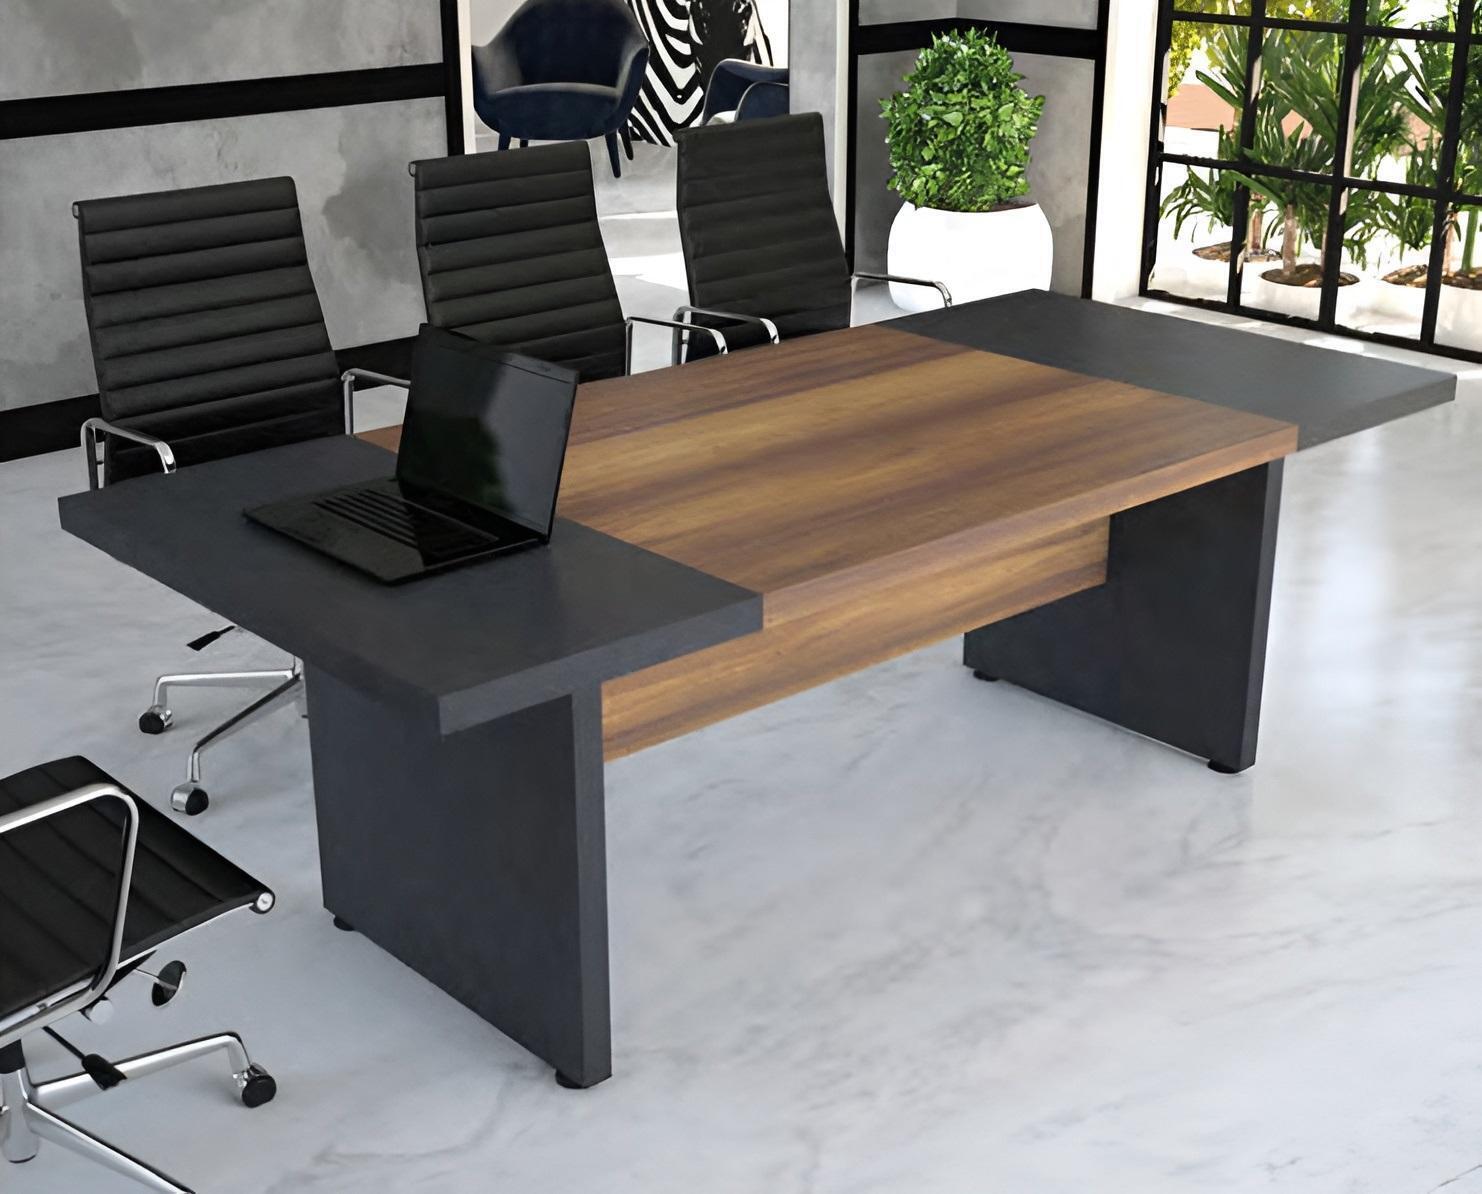 Conference furniture conference table meeting tables large table brown wood